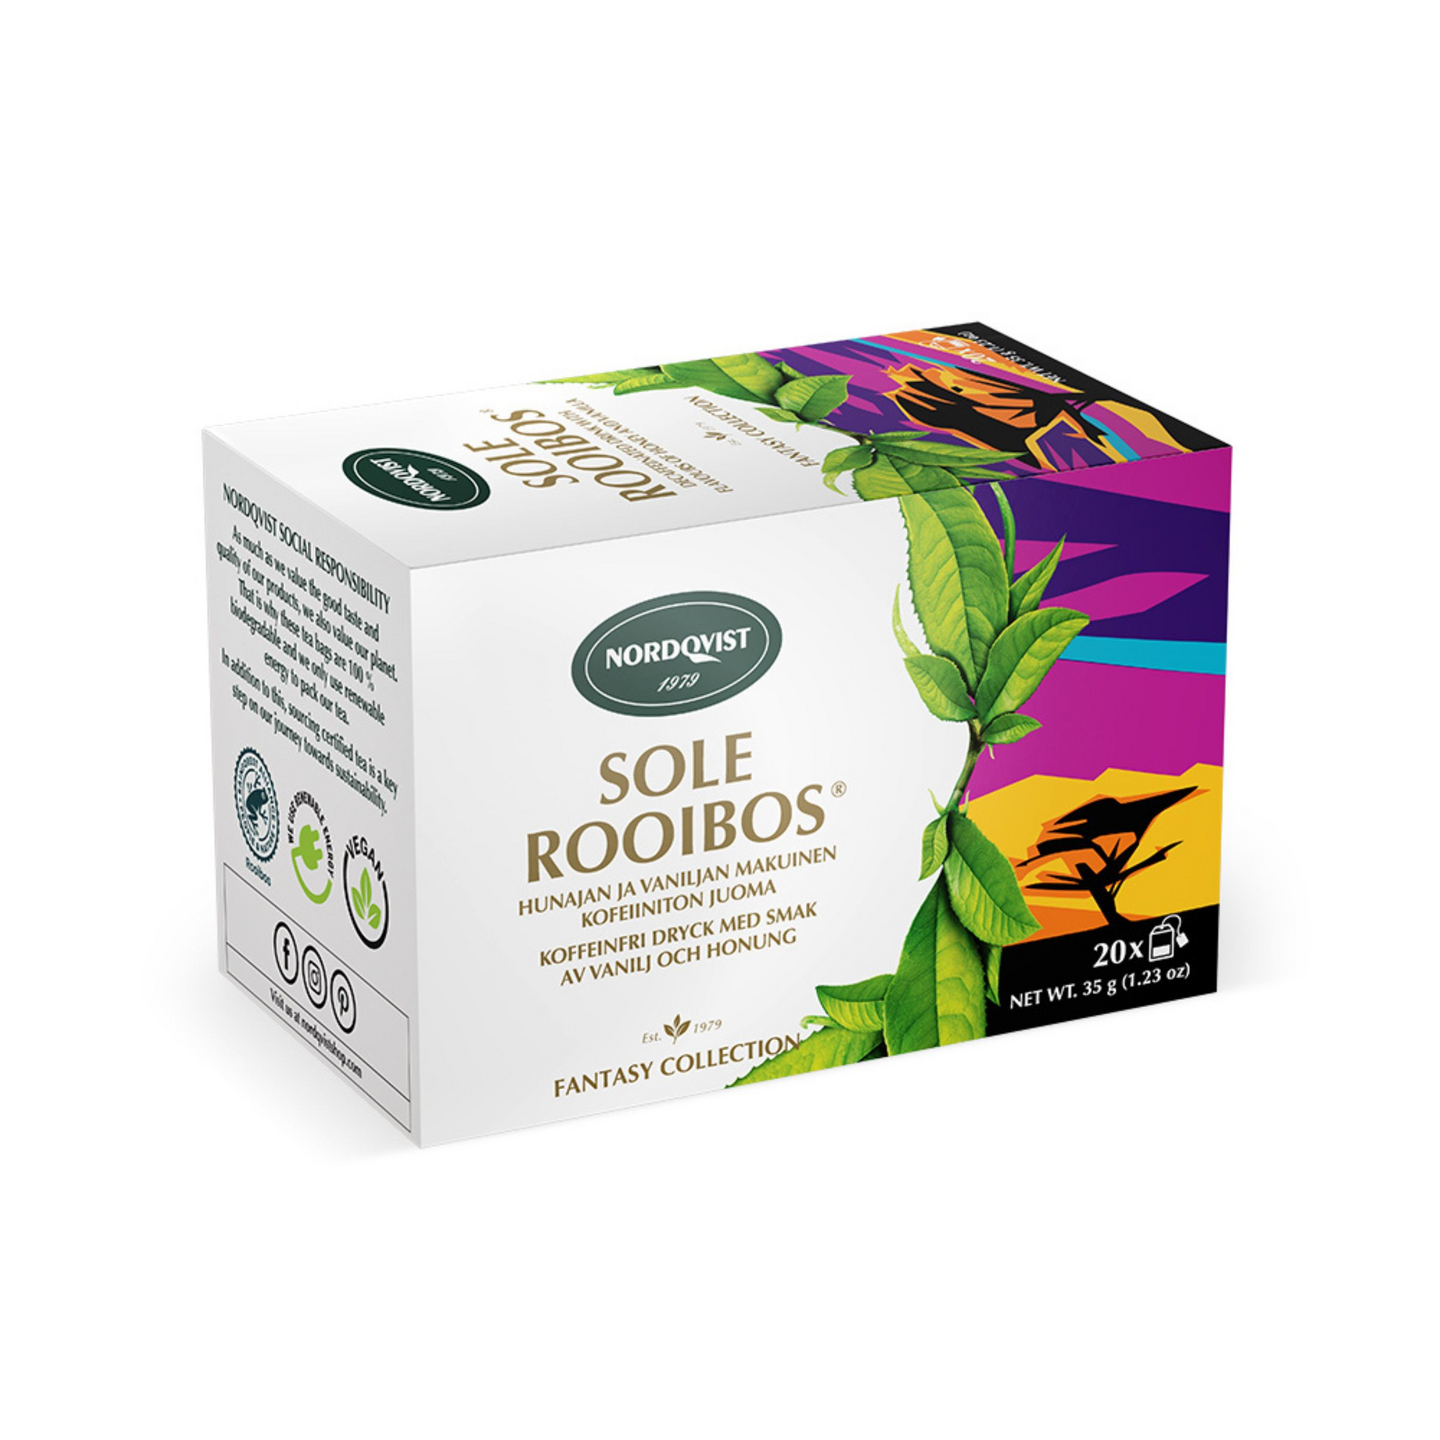 Nordqvist Sole Rooibos 20pss